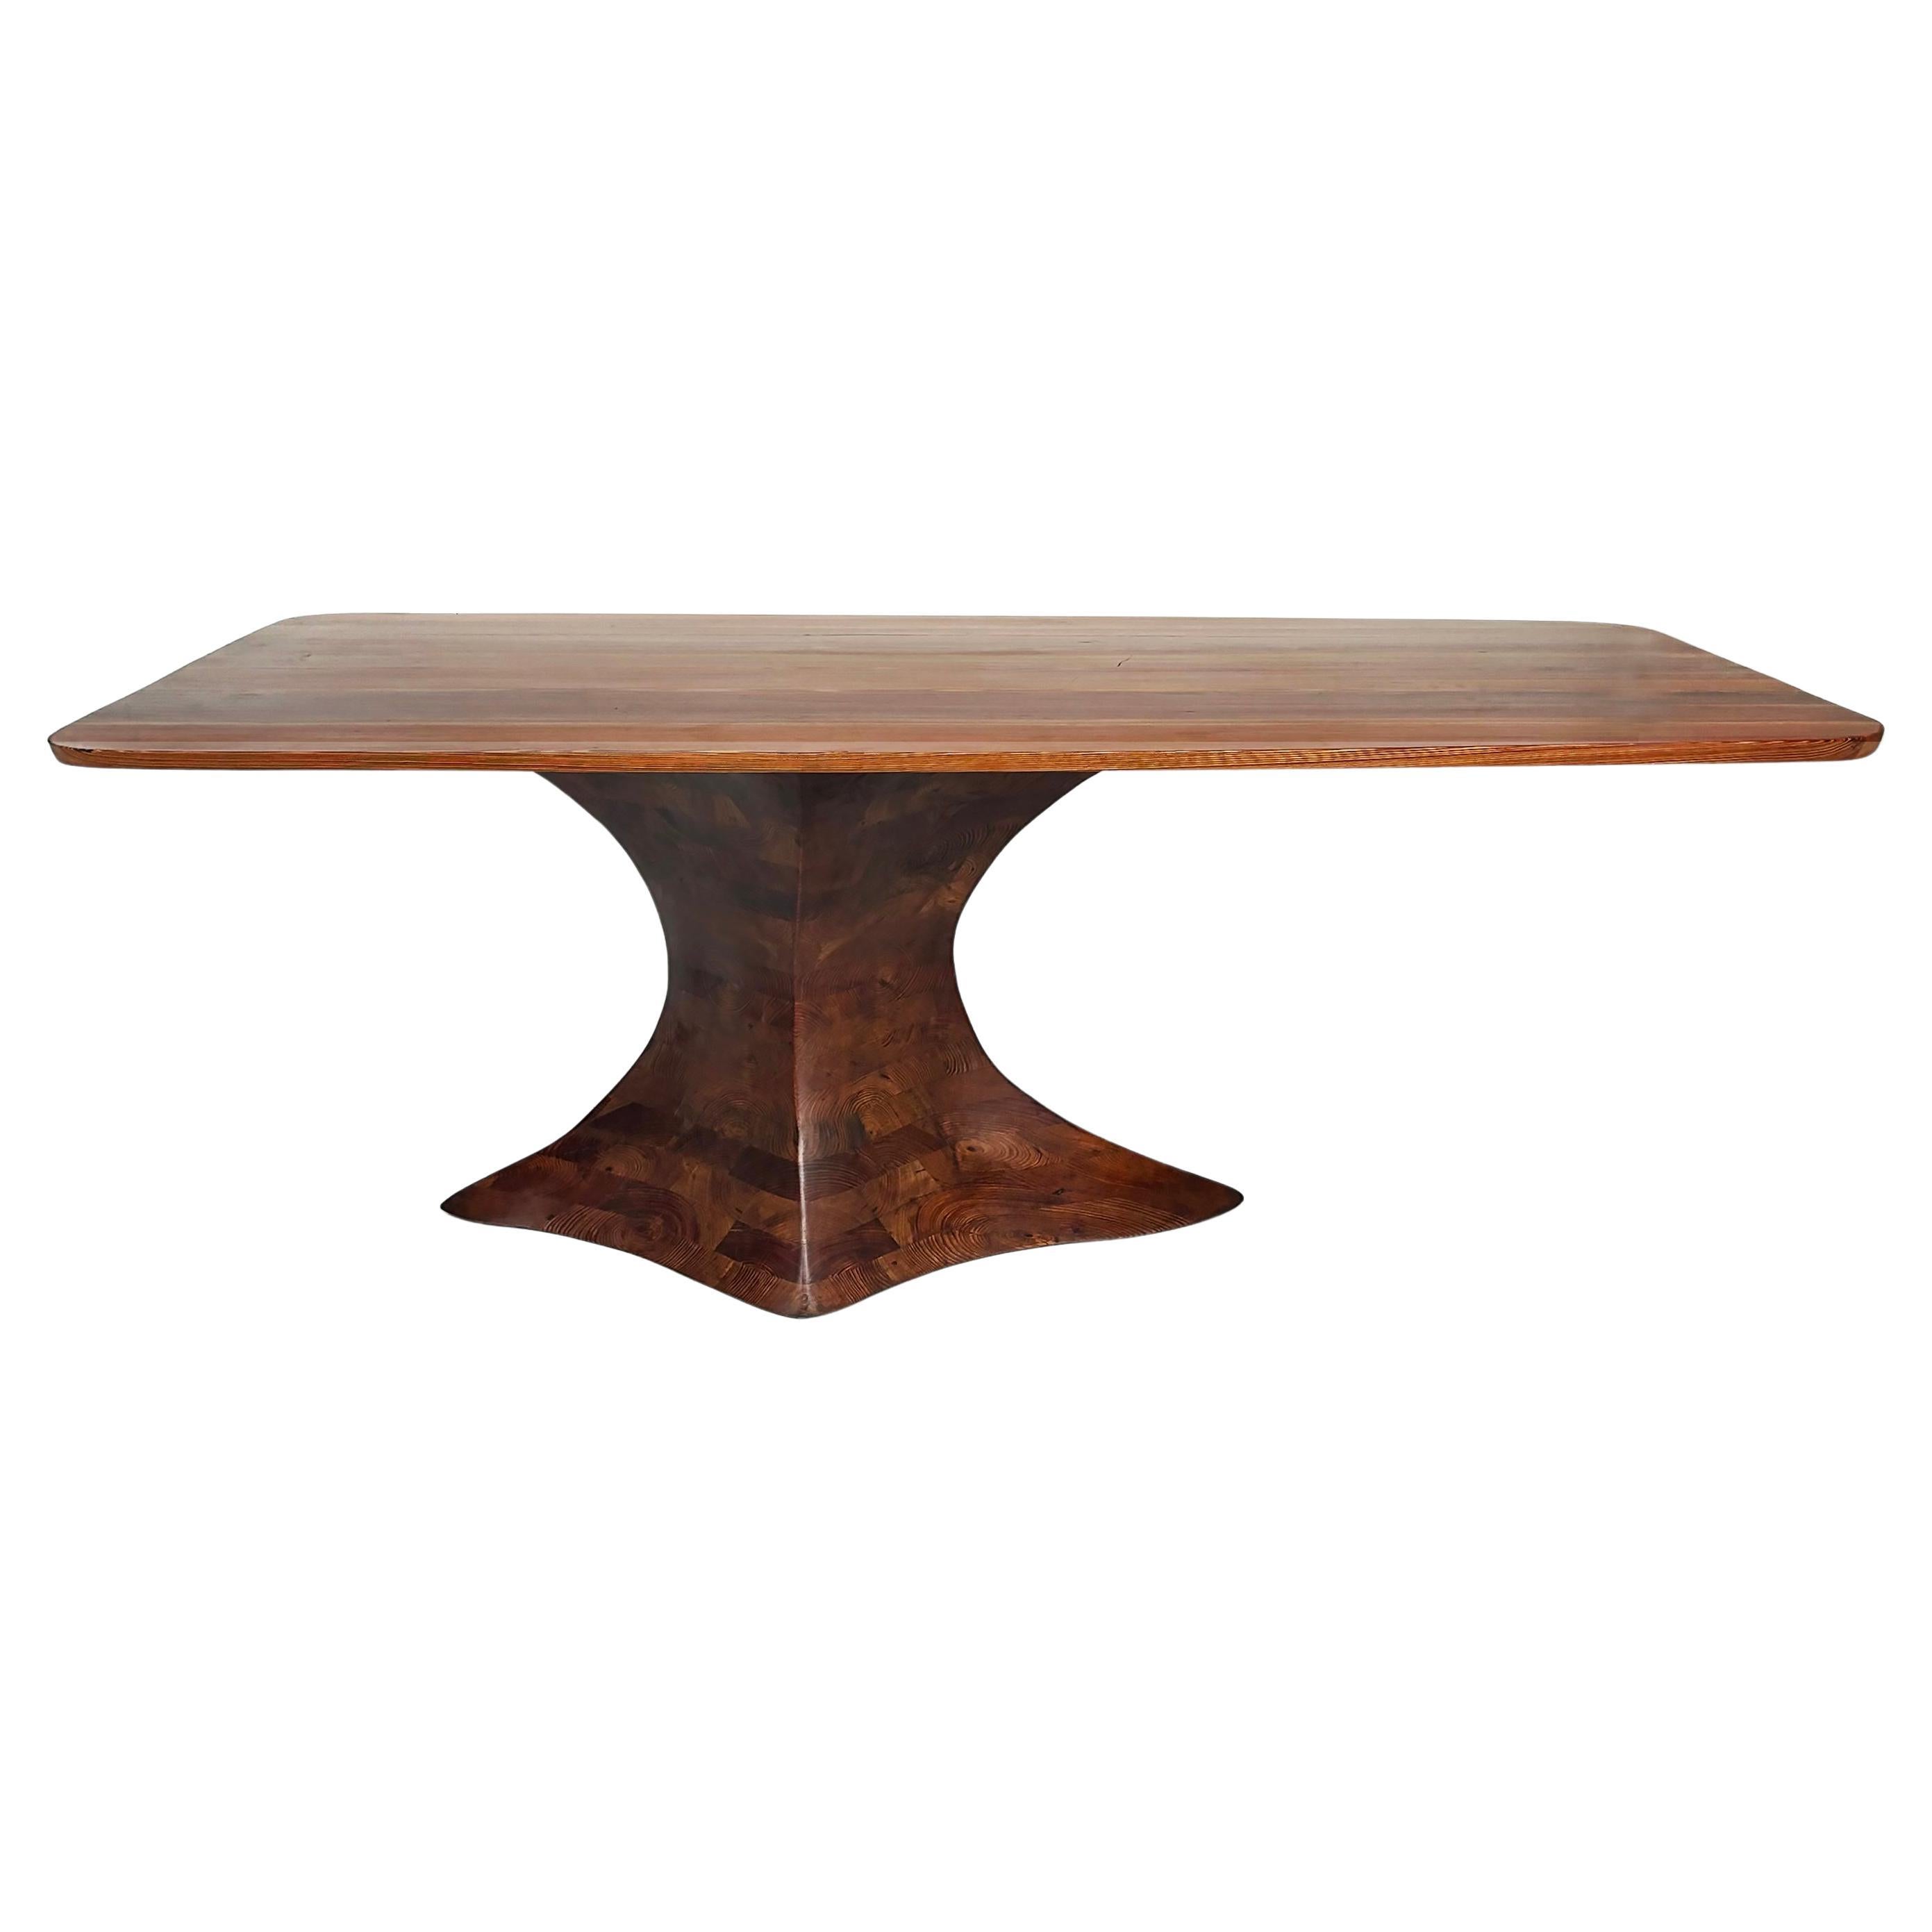 Dade County Pine Sculptural Studio Dining Table, Ray Pirello Woodworking  For Sale